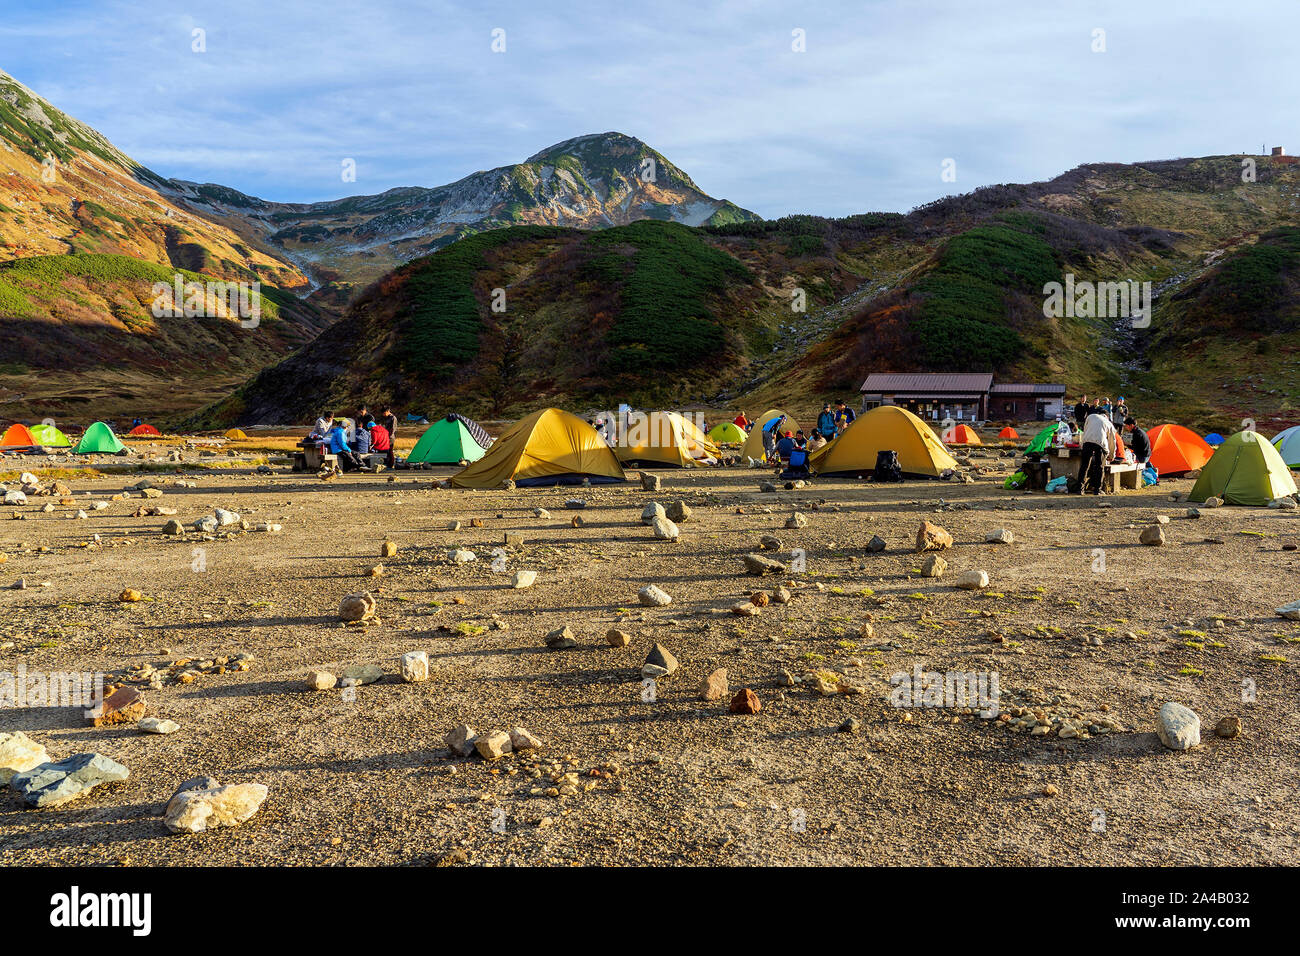 Campsite And Few Colorful Tents Are In The Valley. People Are Preparing Food For Dinner On The Hiking. Outdoor Activities. Stock Photo